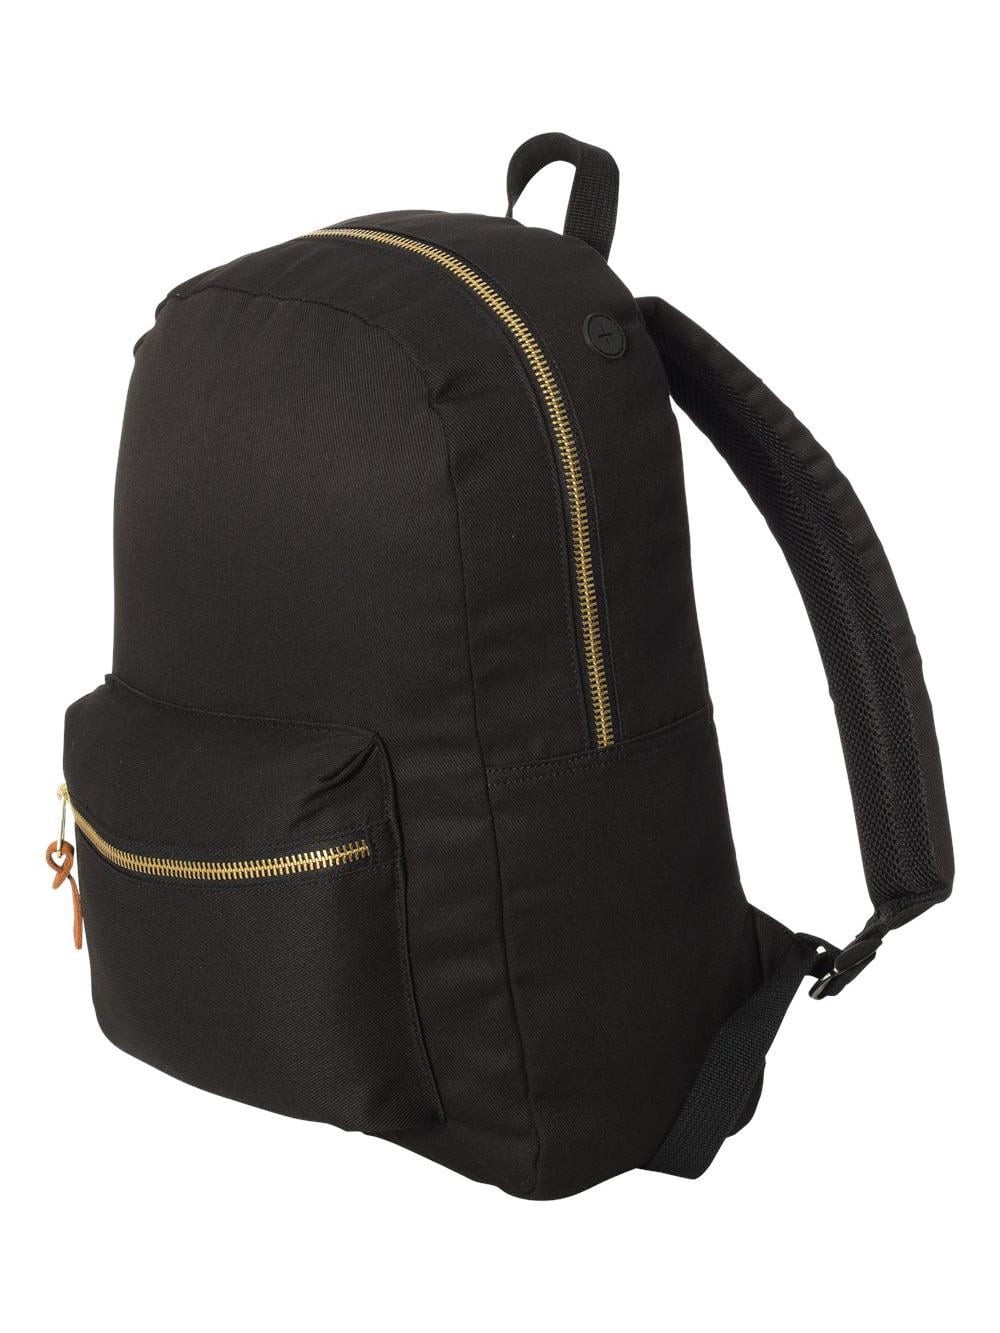 Black Canvas Laptop Backpack Solid Cotton Polyester Compartment Multi-Compartment Tablet Adjustable Strap